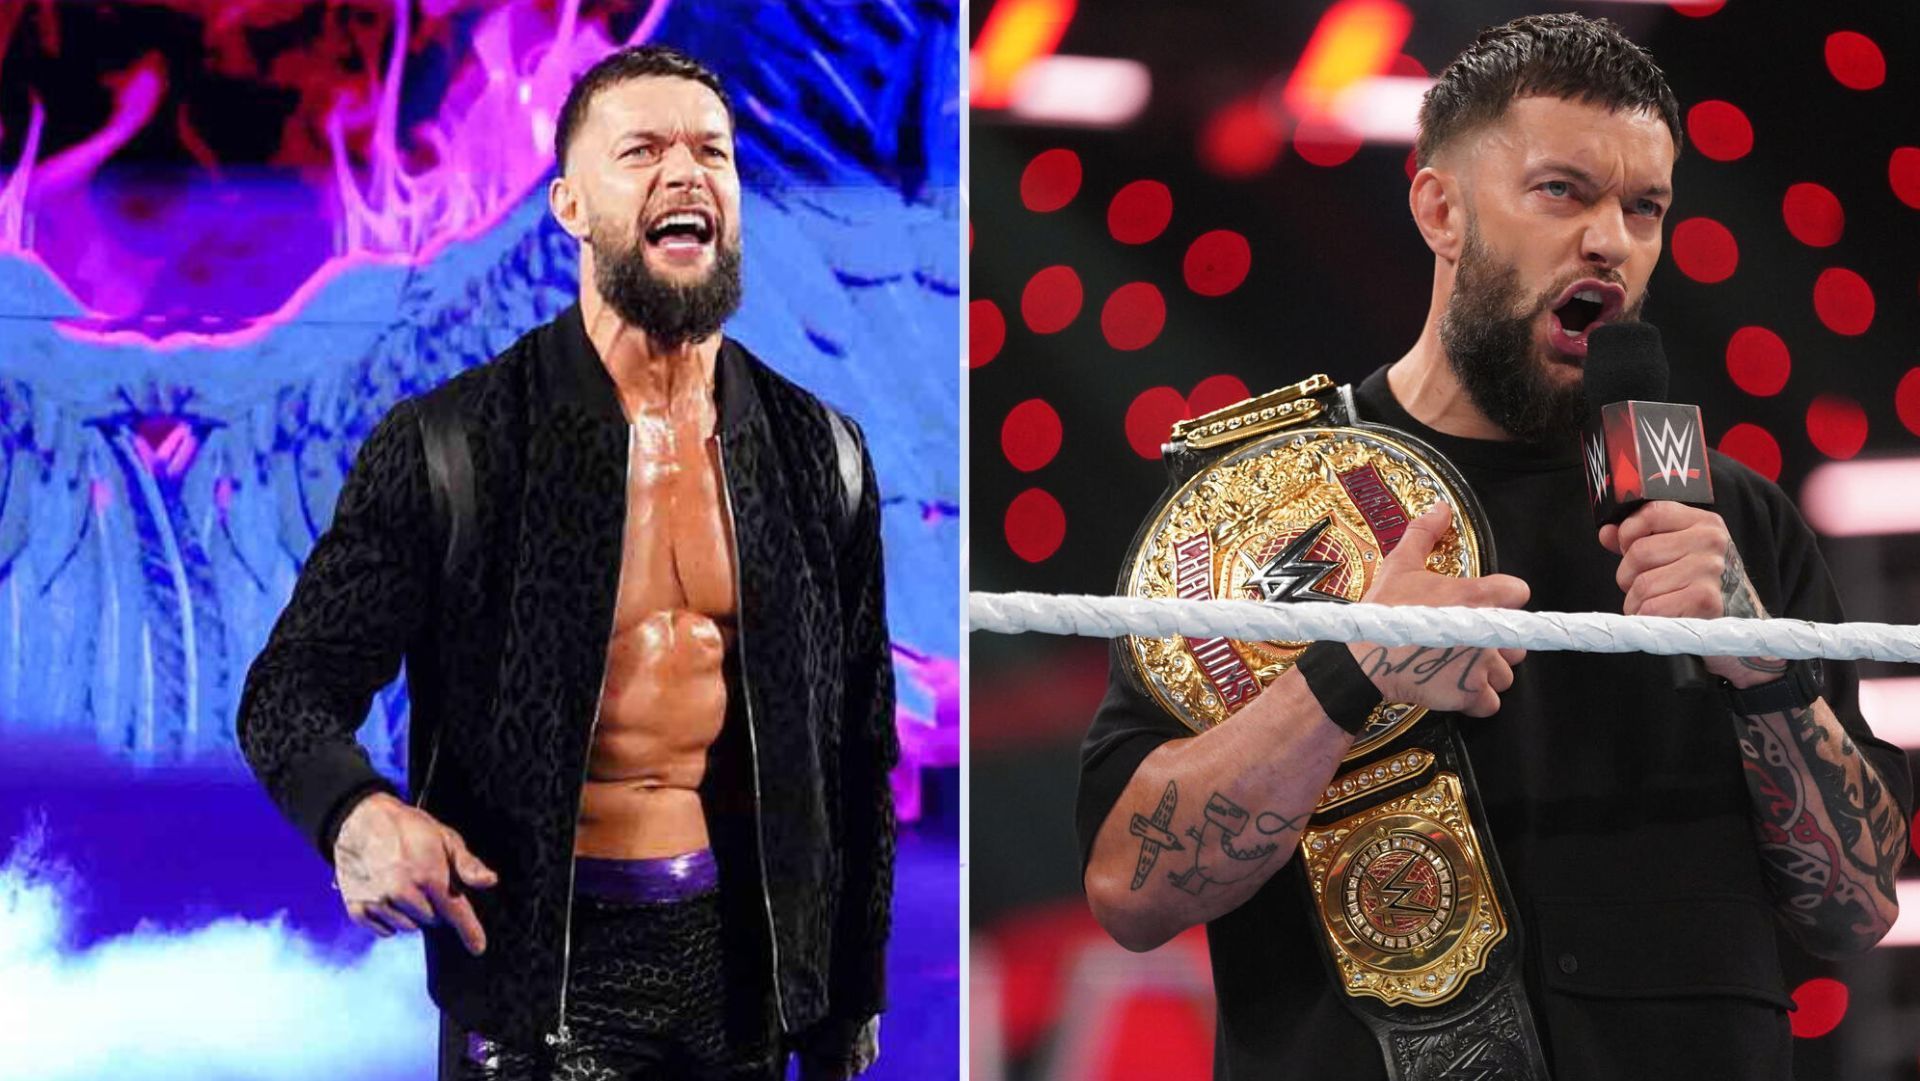 Finn Balor and JD McDonagh defeated Awesome-Truth to become the champions. [Image Source: WWE.com]